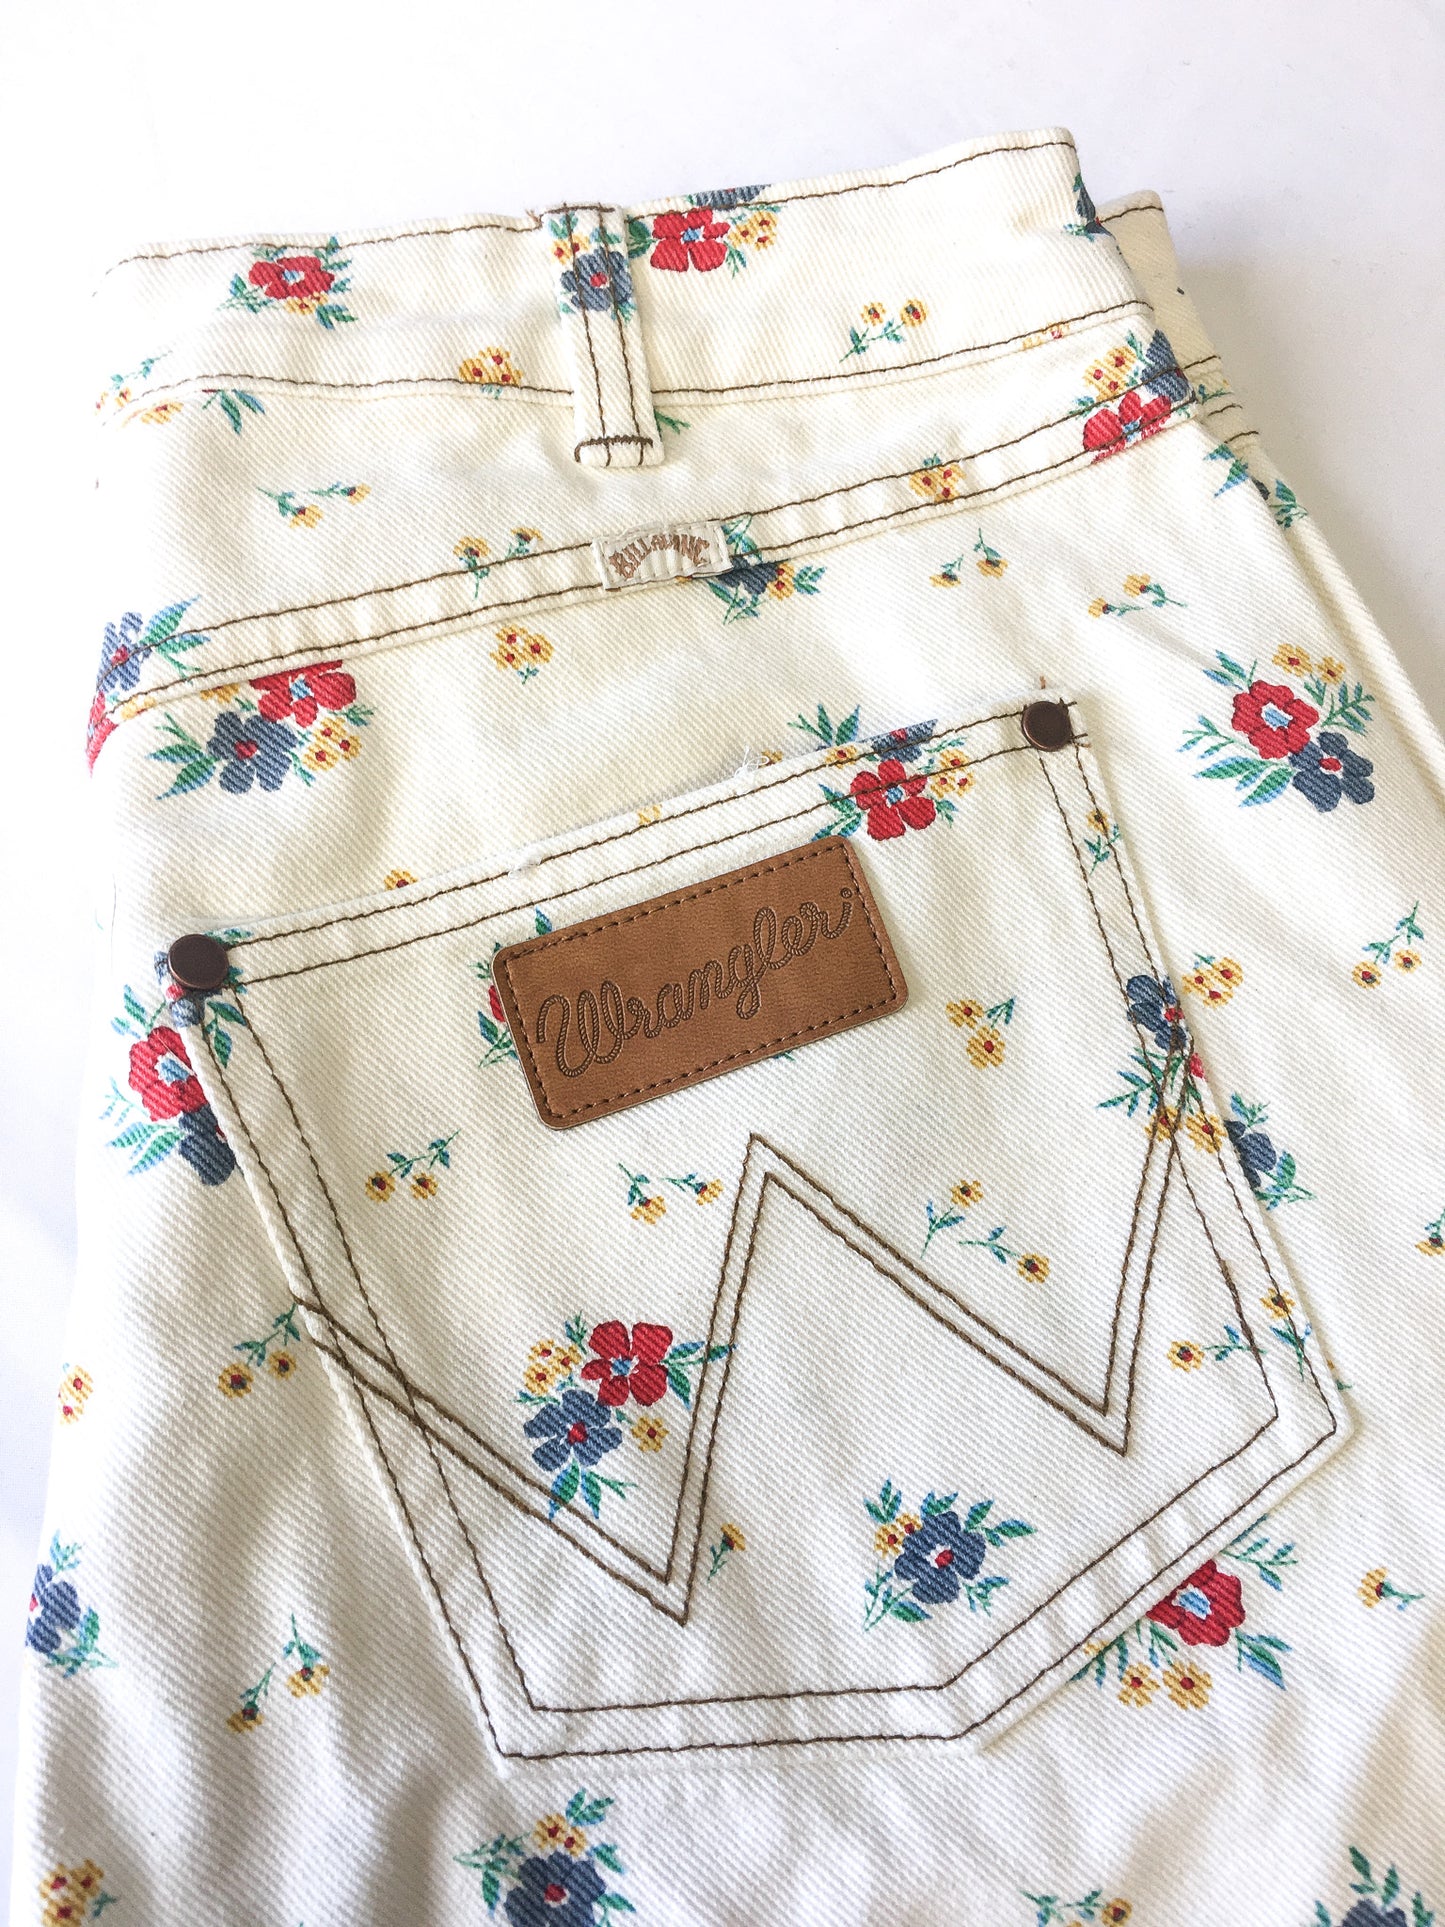 Wrangler x Billabong She's Cheeky Cream/Off-White Floral Cropped Jeans, Women's Sz. 29